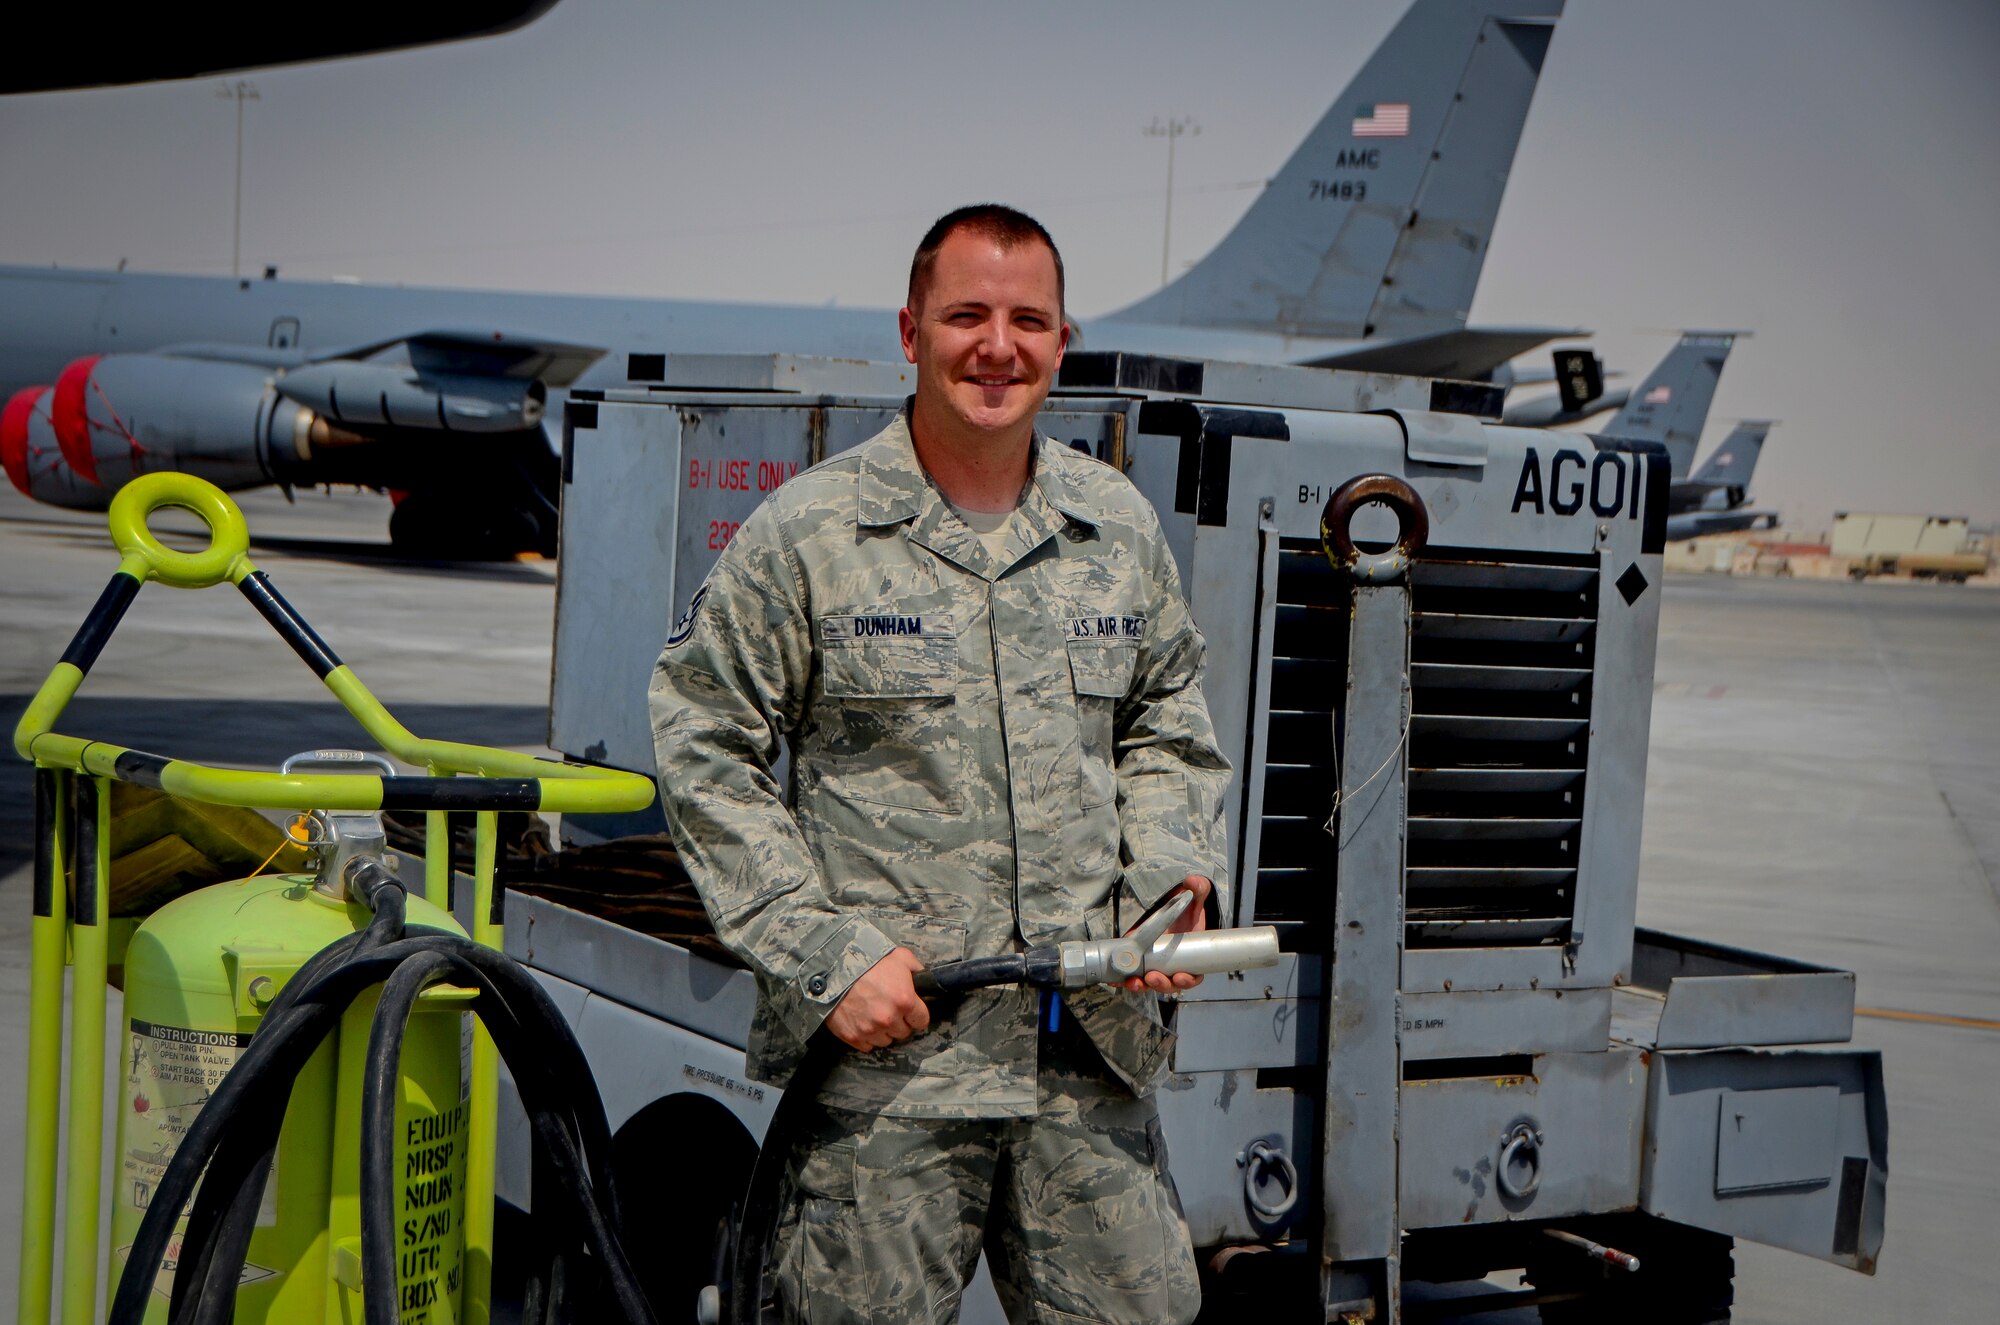 Staff Sgt. William Dunham poses on the flightline in front of a generator, at Al Udeid Air Base, Qatar, April 24, 2014. Dunham, a munitions system specialist assigned to the 379th Expeditionary Aircraft Maintenance Squadron put out a fire on a generator which was hooked up to a B-1B Lancer April 17, 2014. Dunham is a volunteer firefighter for the city of Box Elder, S.D., which is just outside of Ellsworth Air Force Base, S.D., where he is stationed. (U.S. Air Force photo/Senior Airman Jared Trimarchi) 